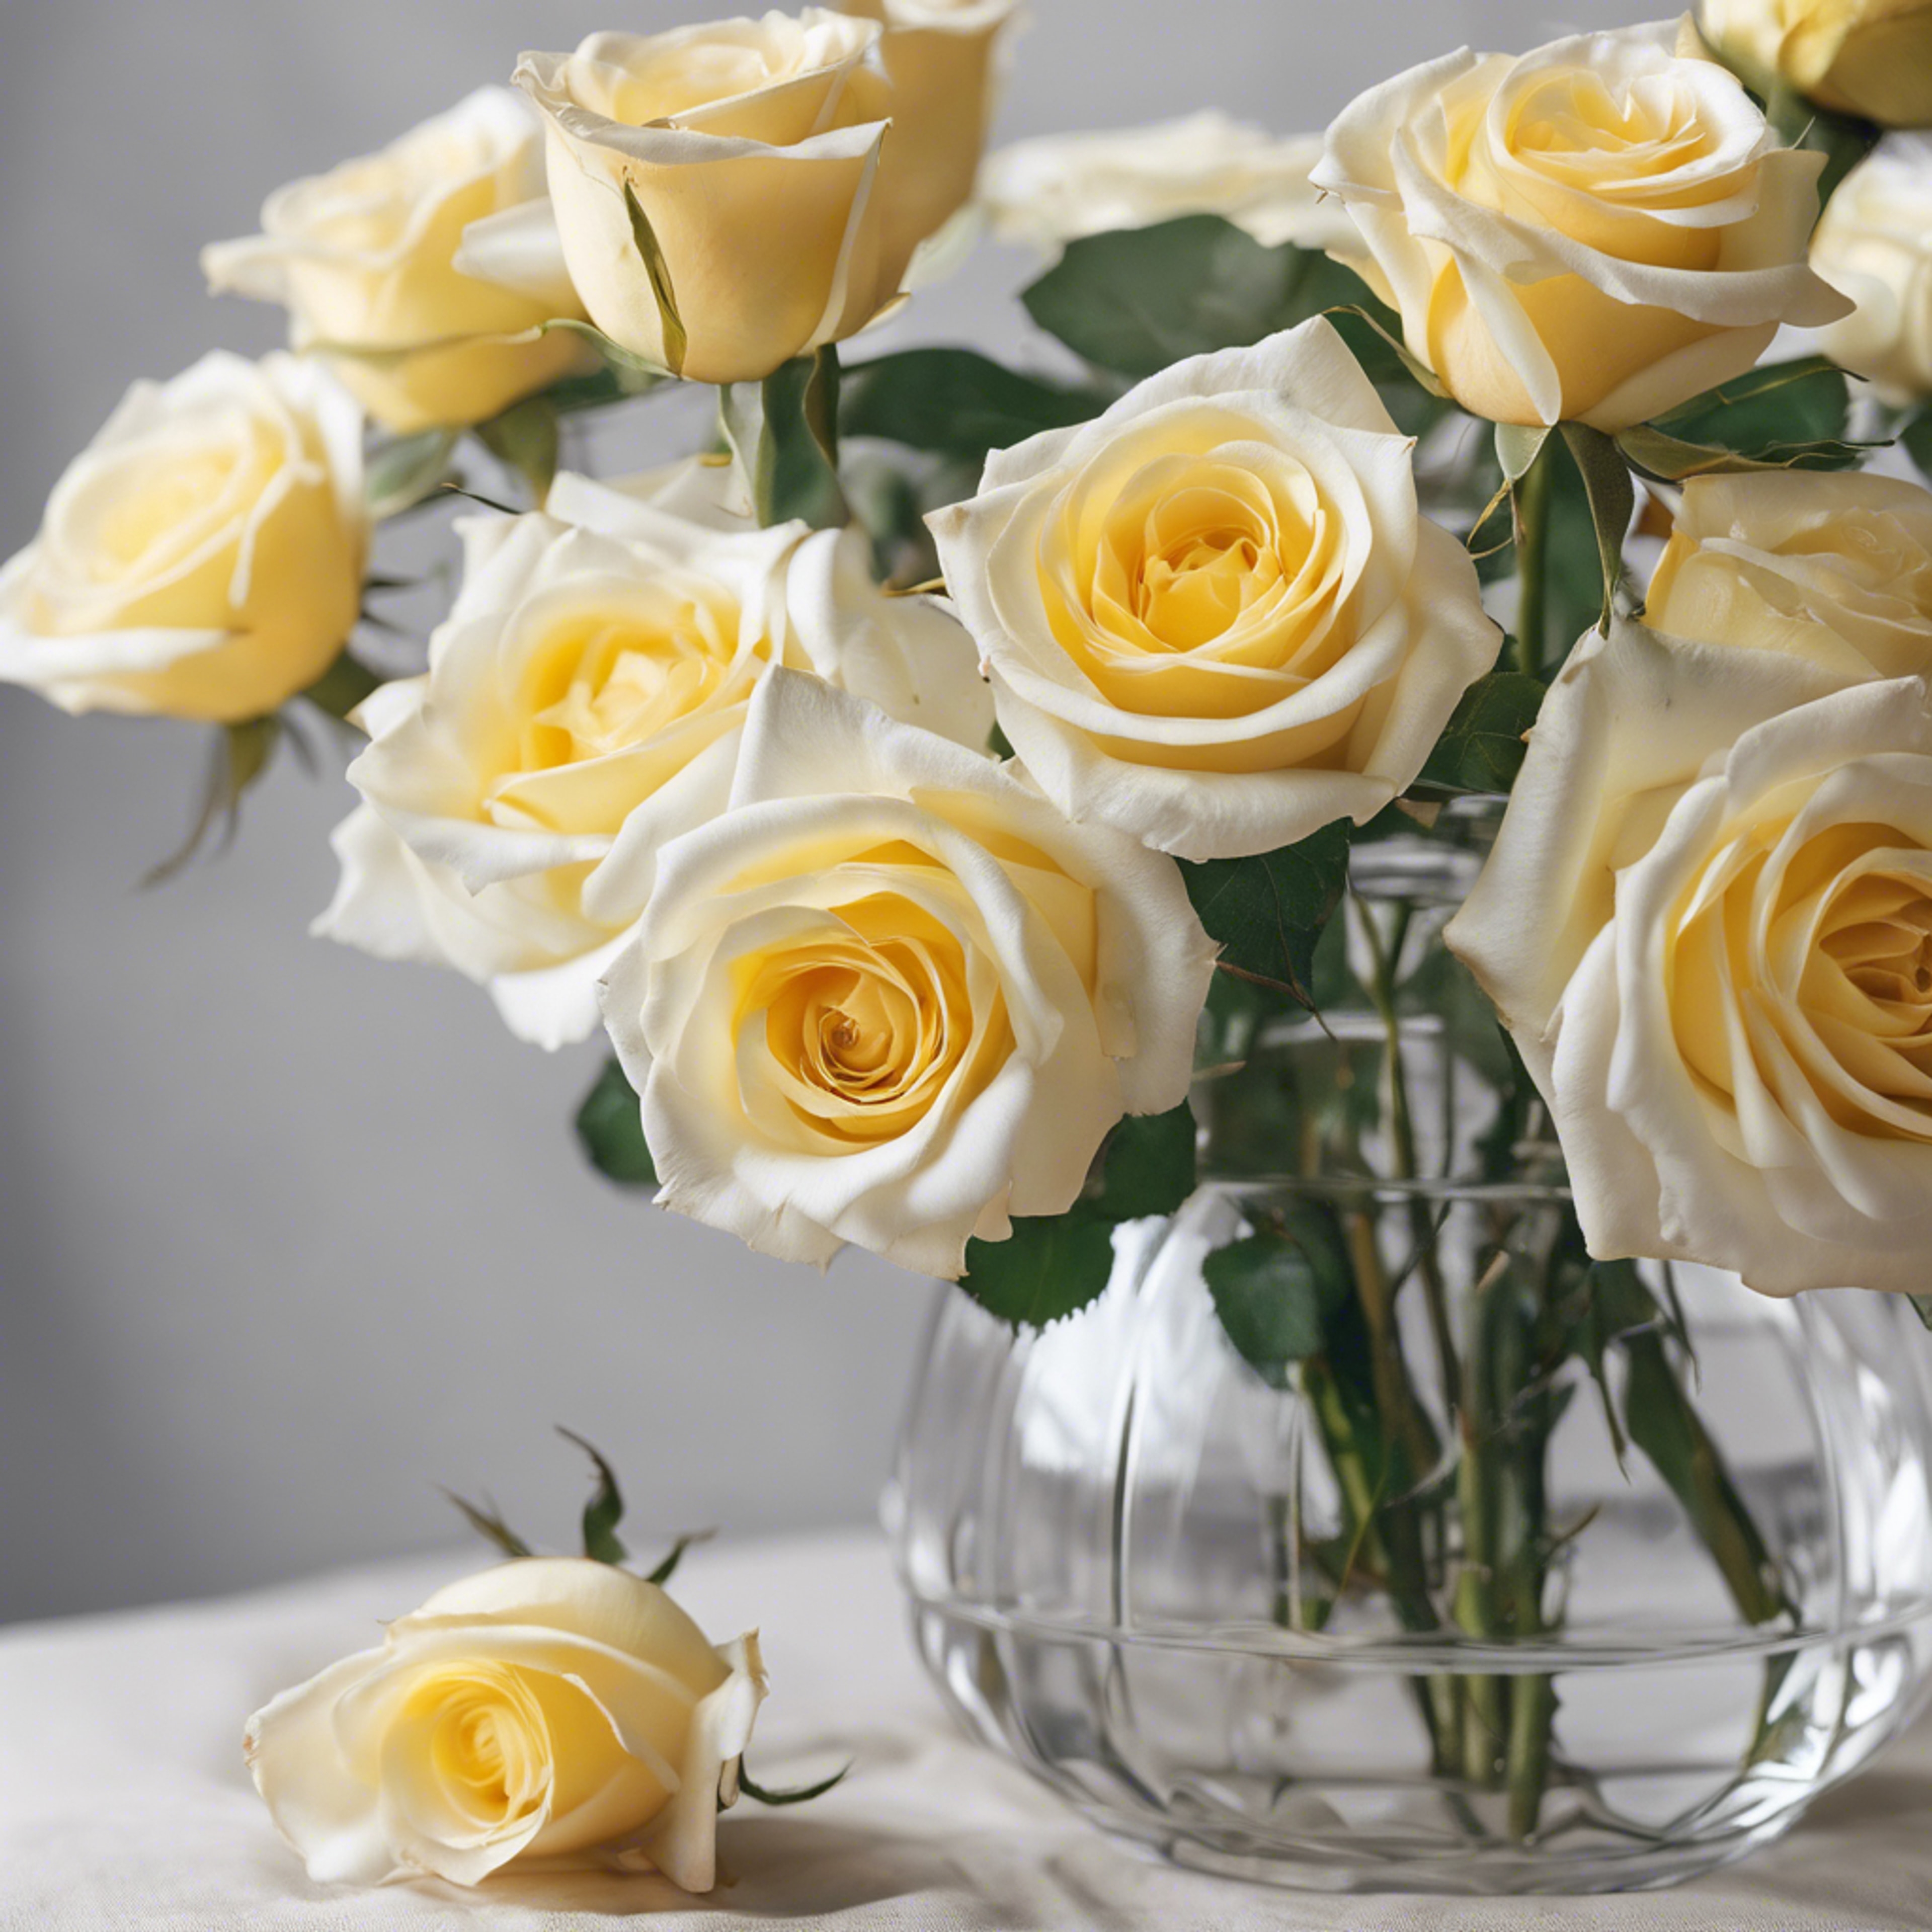 A beautiful array of luminescent white and yellow roses in a crystal clear vase. Taustakuva[29c0e485a0b1412795b9]